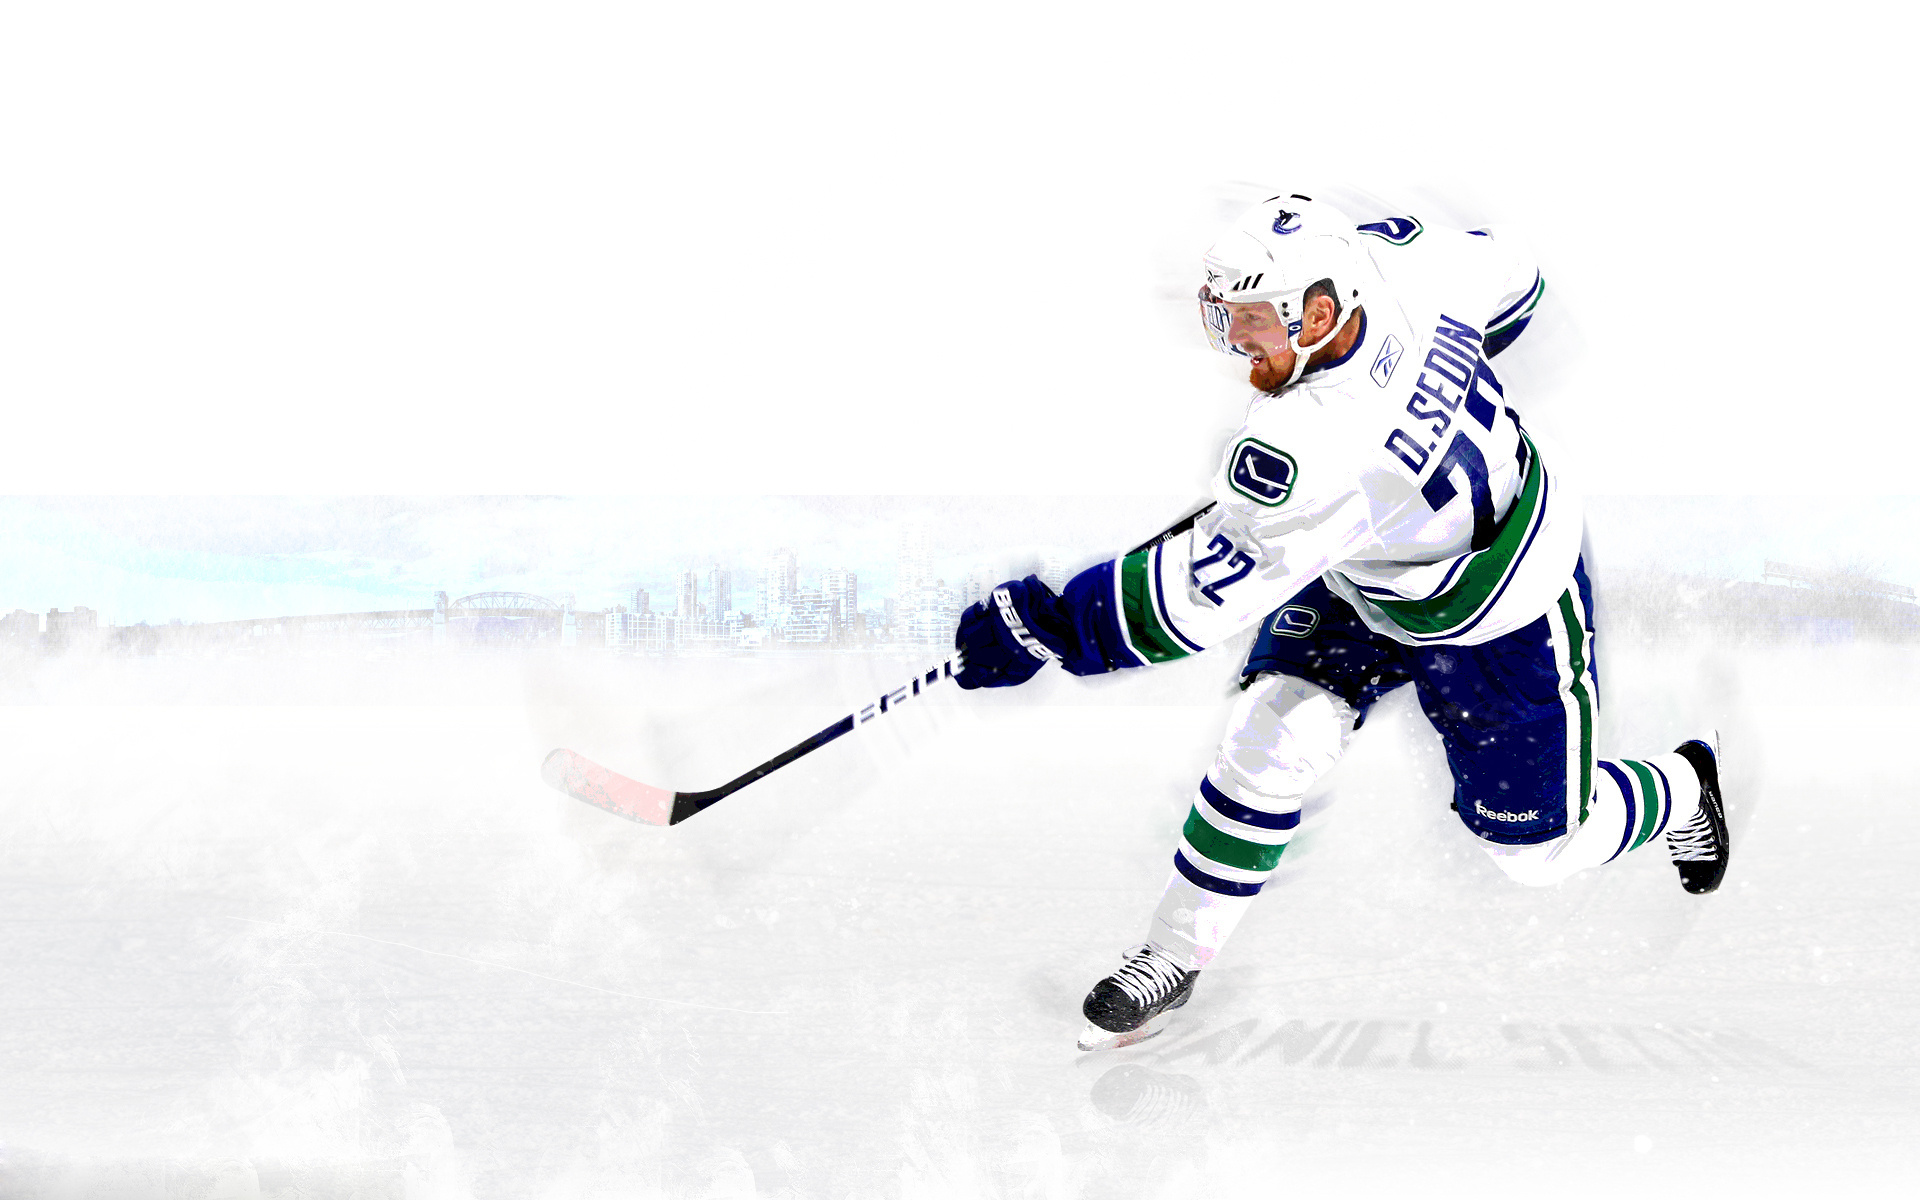 Hockey wallpapers HD, Detailed player close-ups, Icy battleground, Passionate fans, 1920x1200 HD Desktop